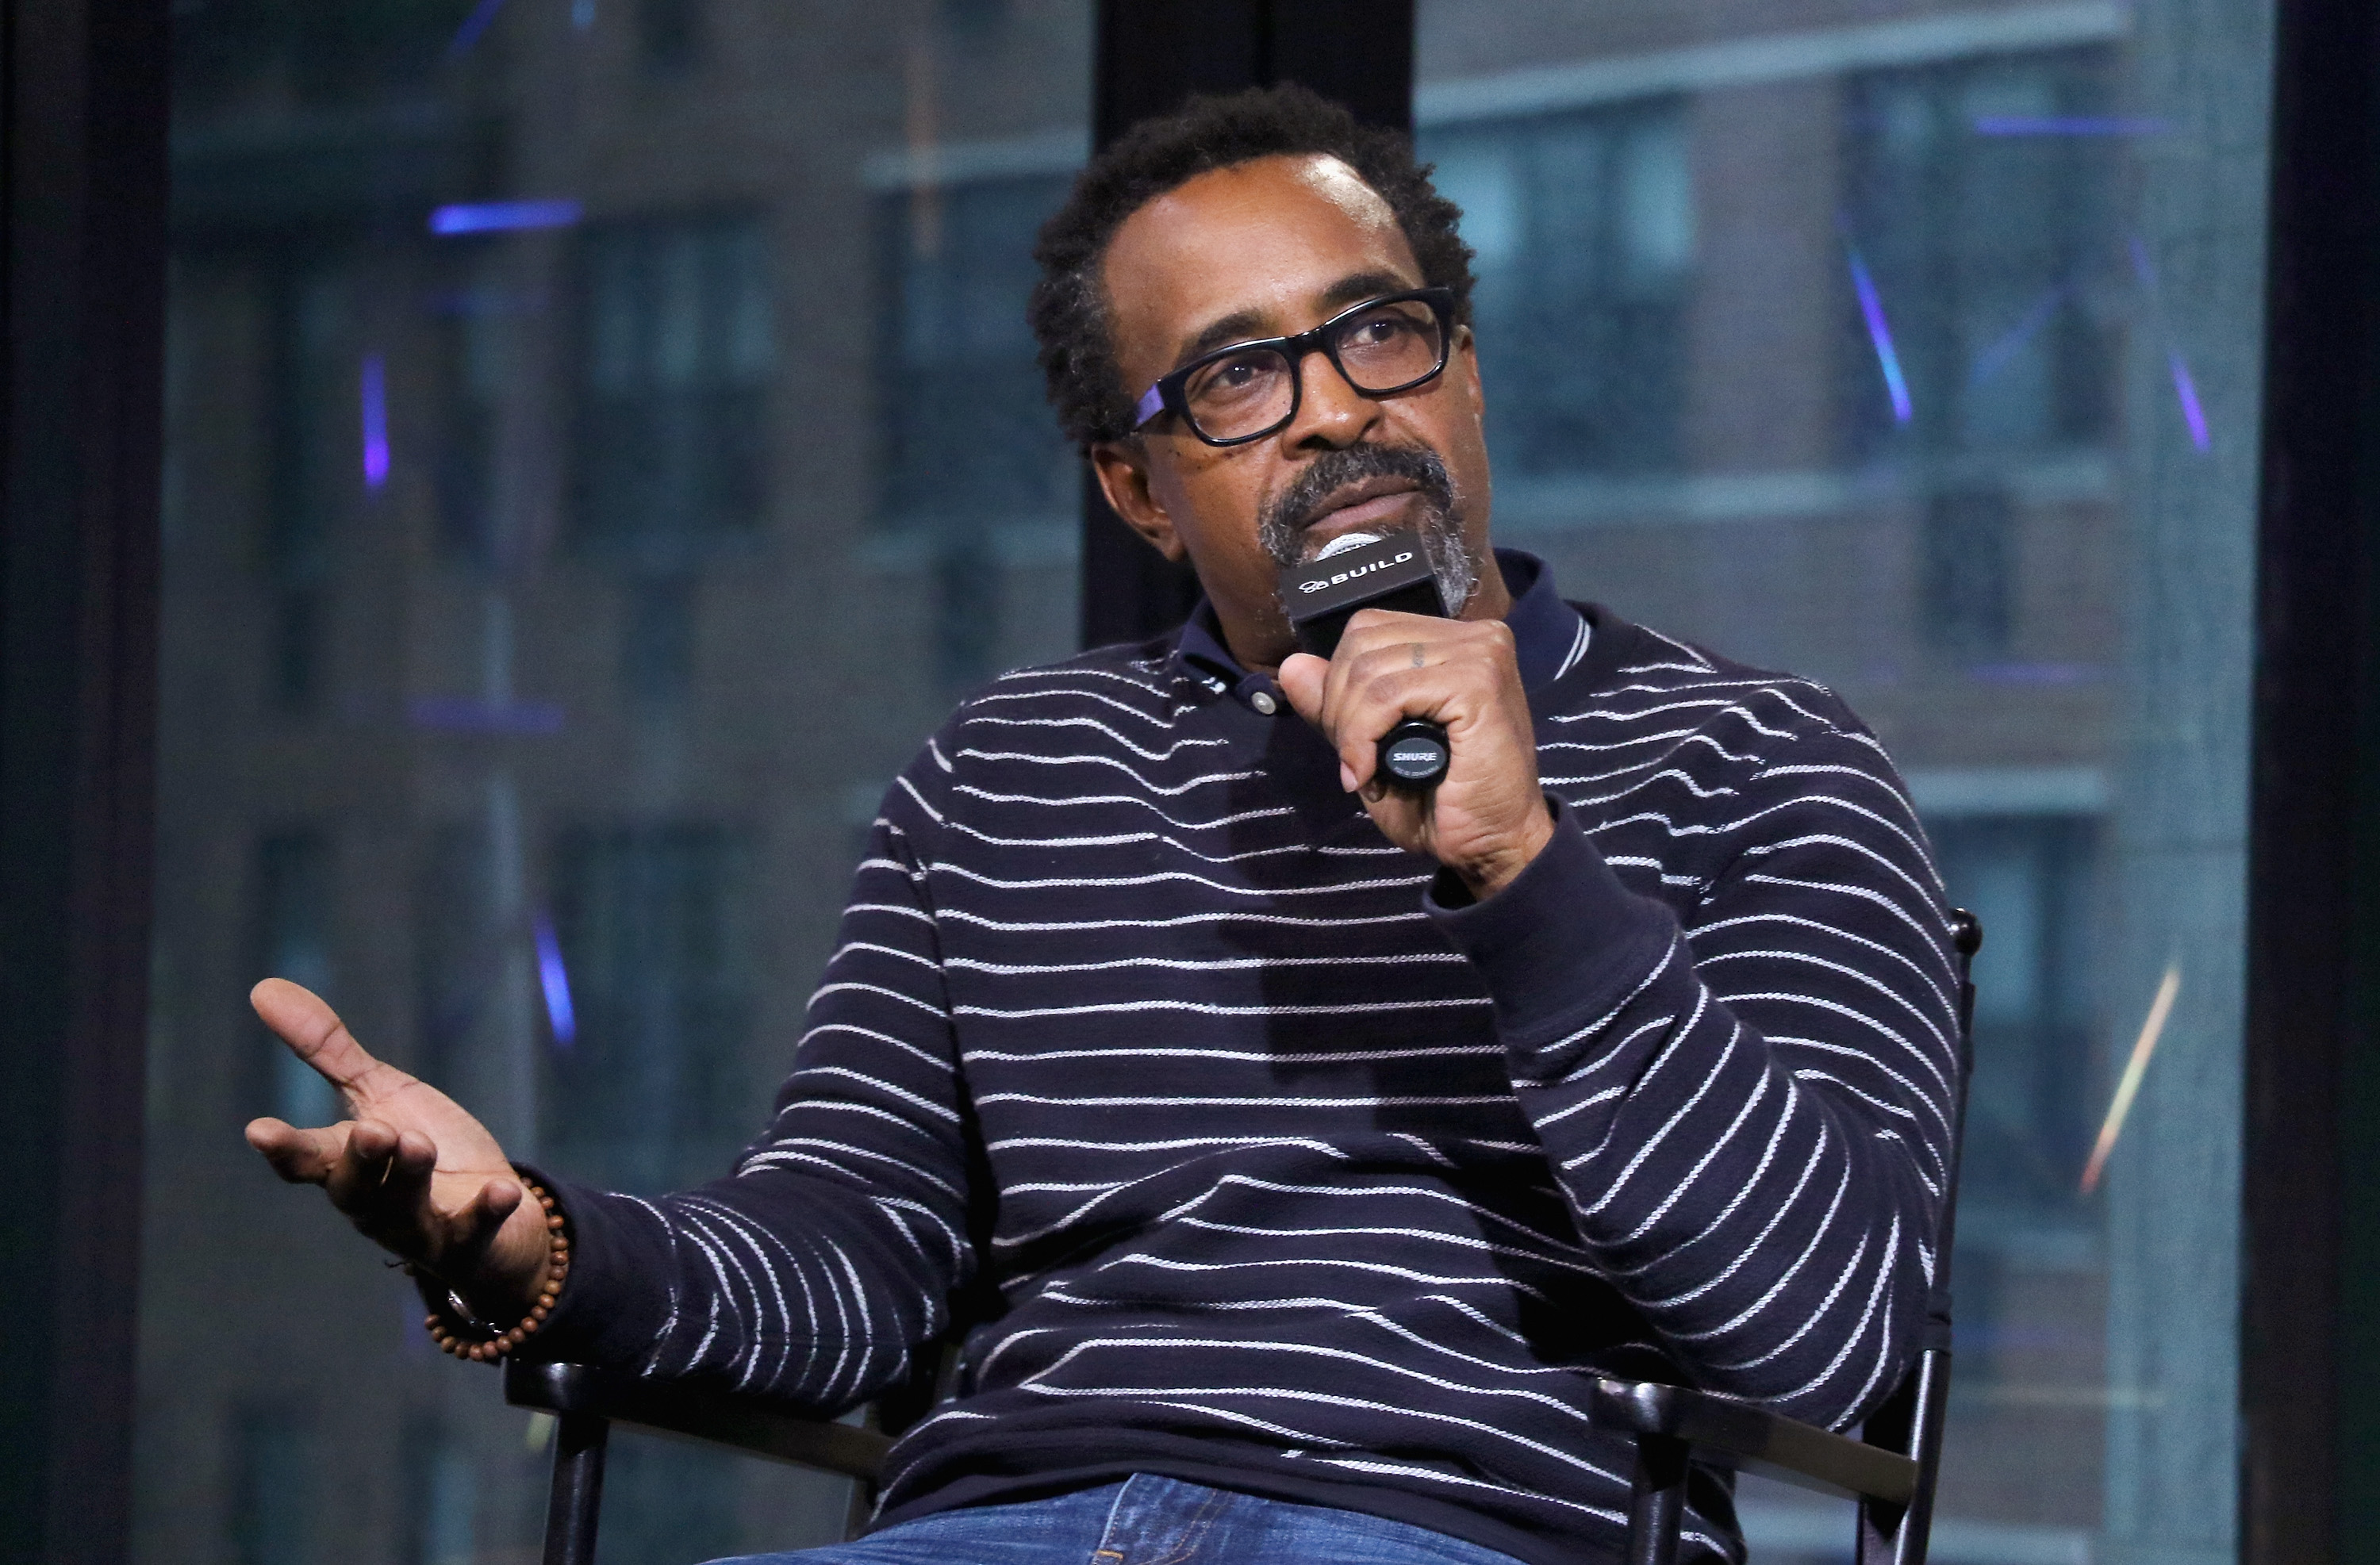 Tim Meadows attends the Build Speaker Series Presents Tim Meadows discussing "Son of Zorn" at AOL HQ on September 29, 2016, in New York City. | Source: Getty Images